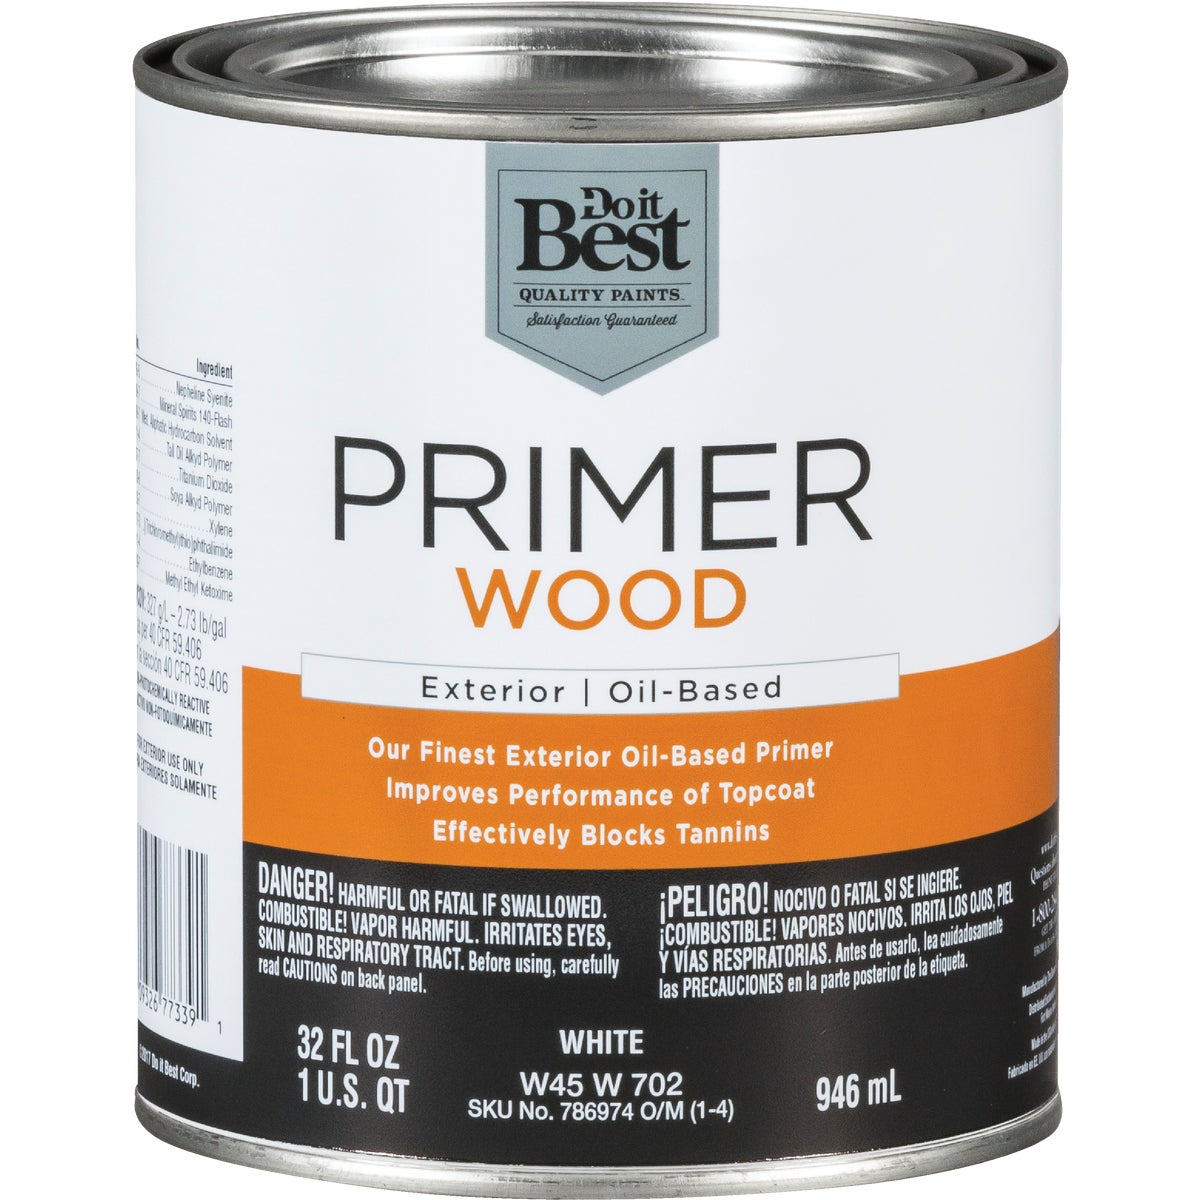 Item 786974, Our finest exterior oil-based primer for use on exterior wood, manufactured